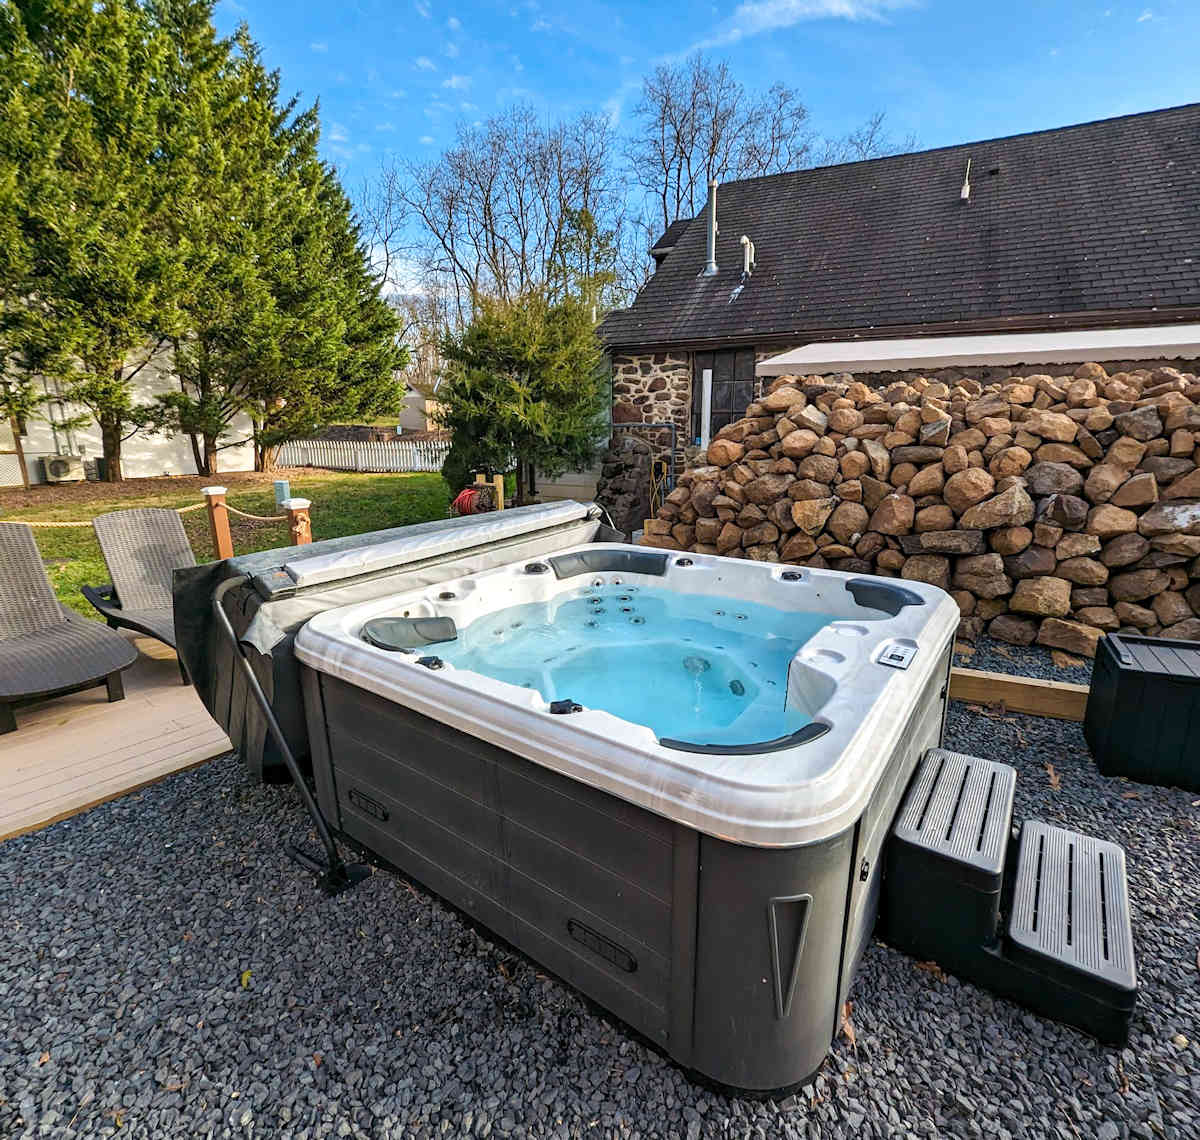 The outdoor jacuzzi and lounge area at Chimney Hill Estate Inn